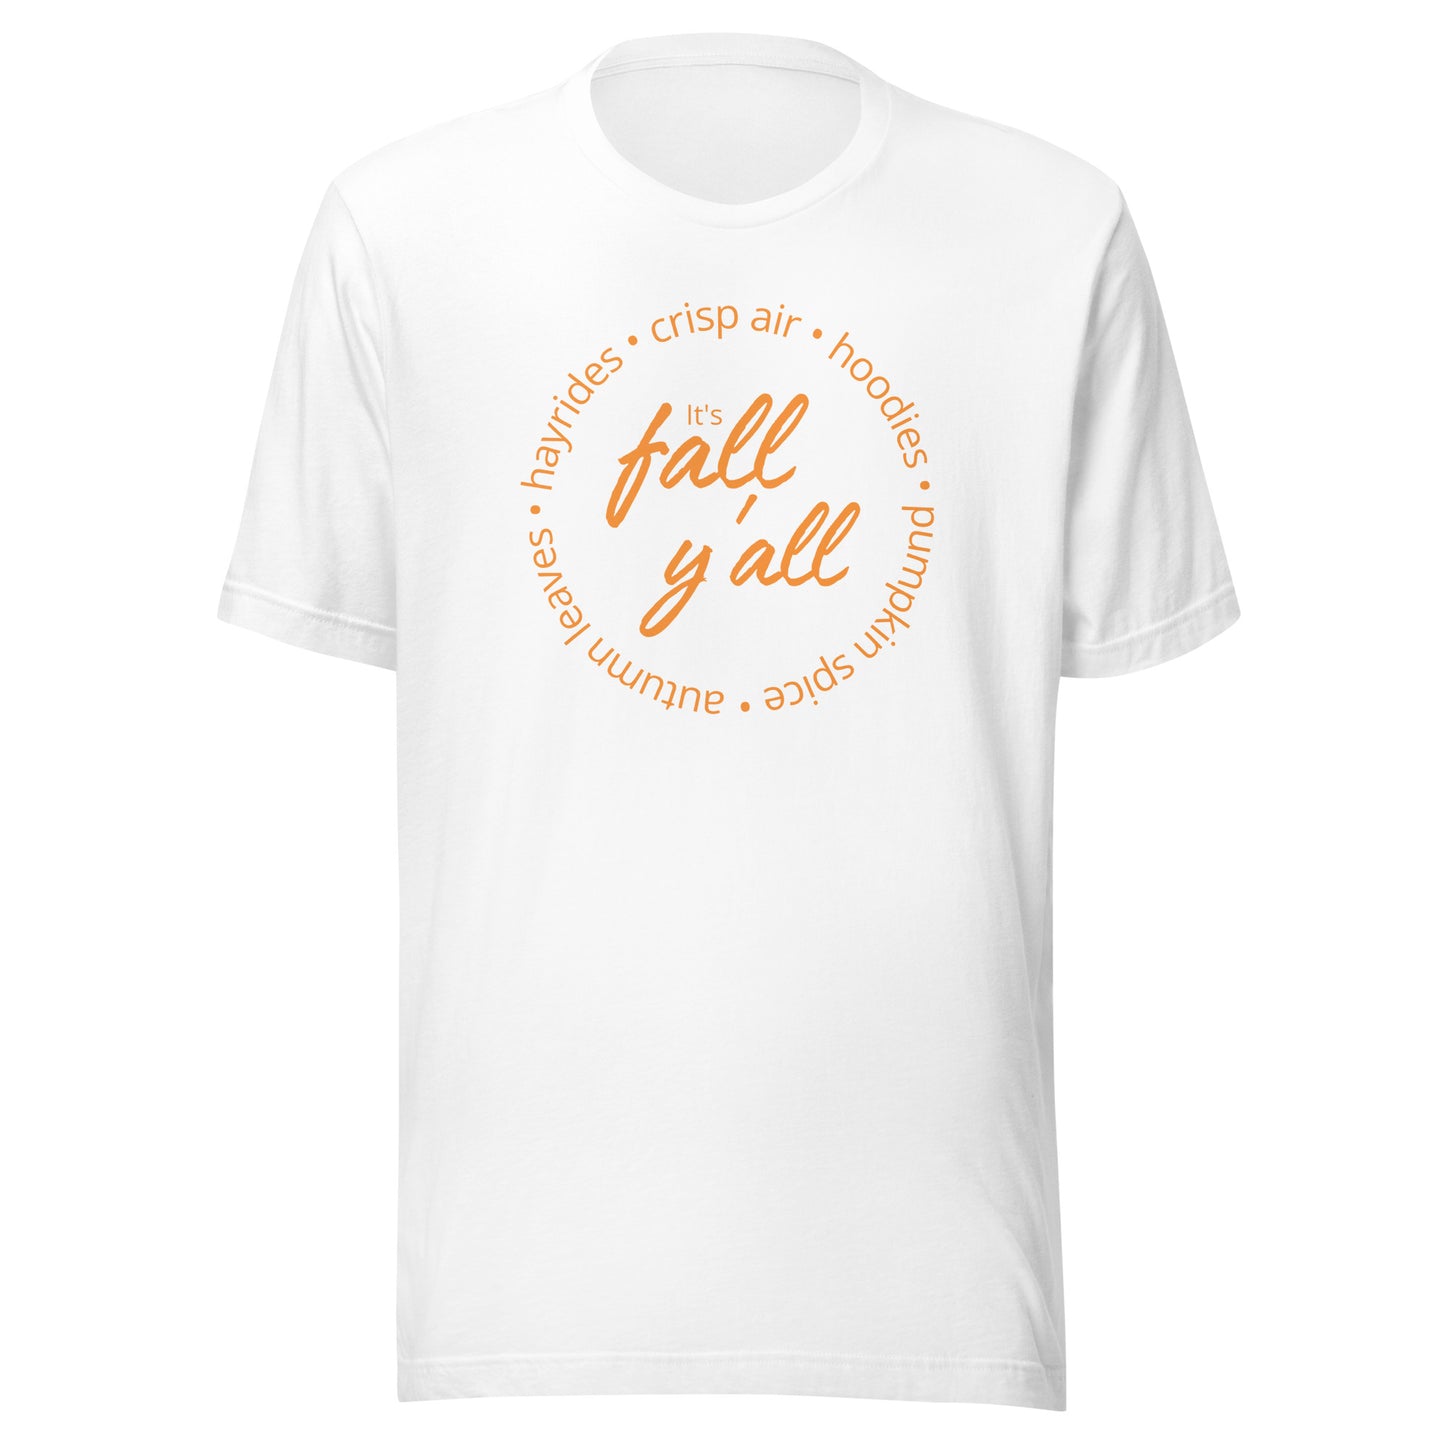 It's Fall Y'all T-Shirt